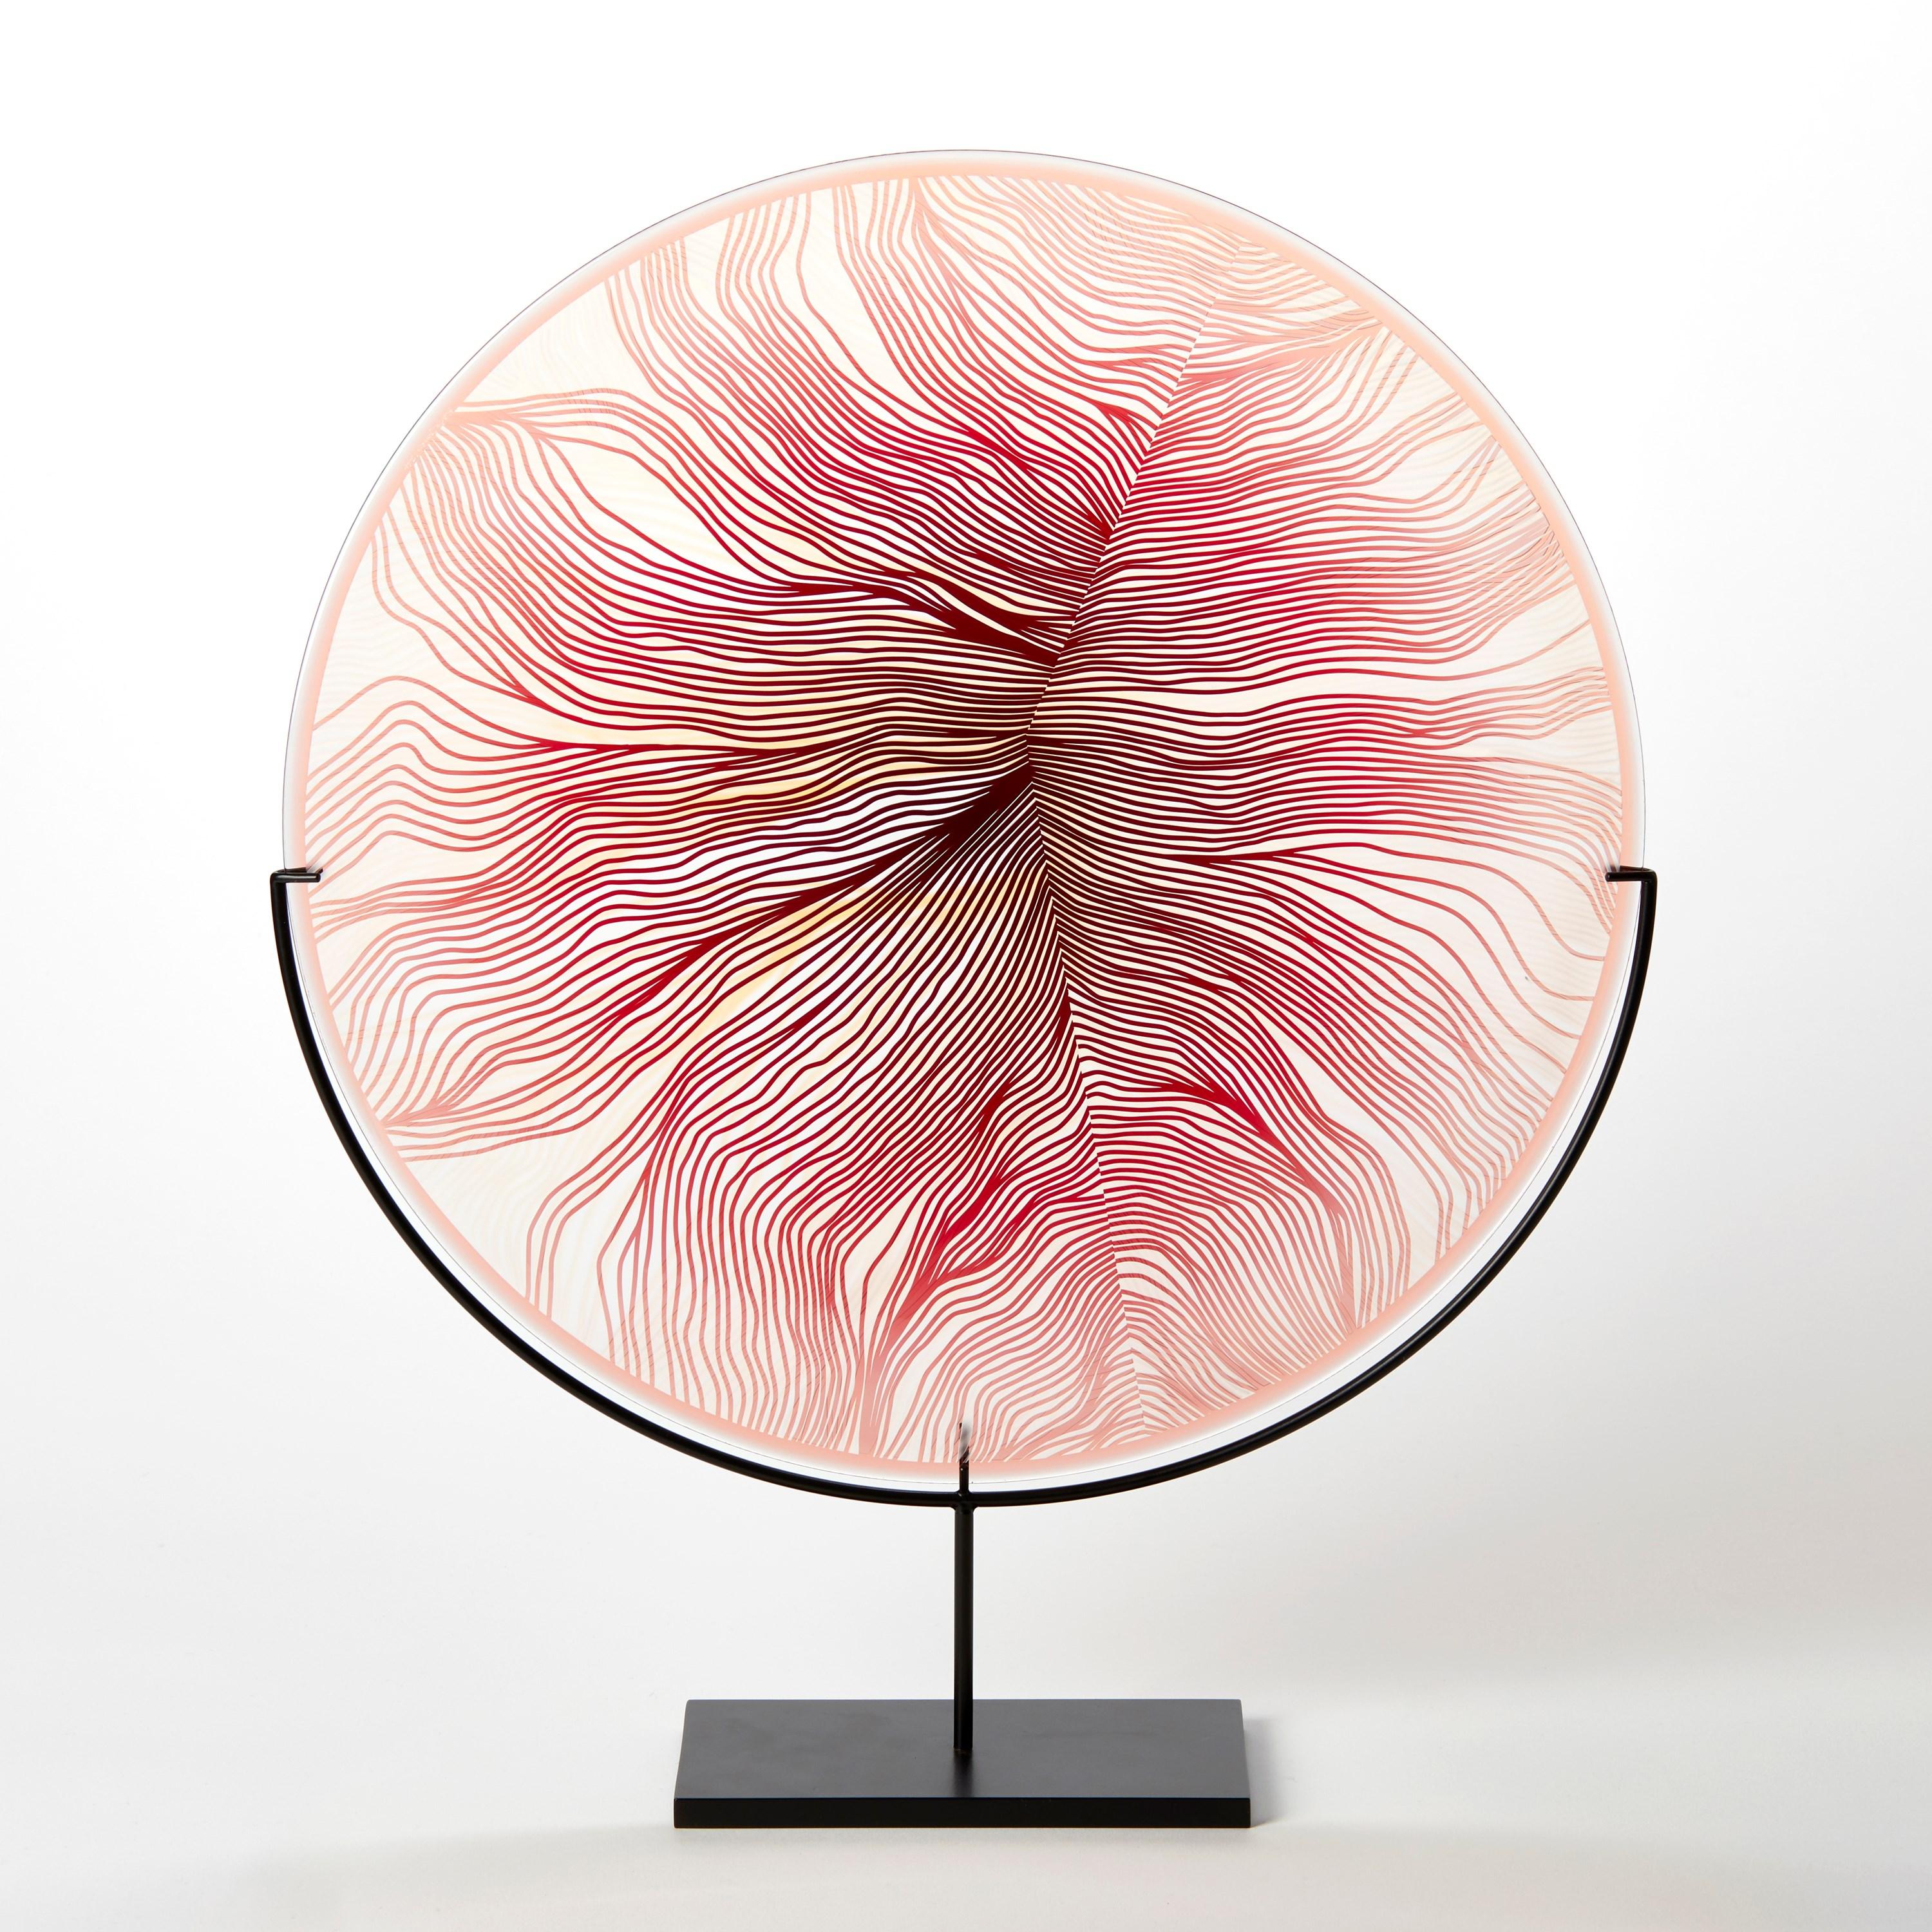 'Solar Storm Ruby Red over Gold' is a unique handblown and cut glass artwork by the British artist, Kate Jones of Gillies Jones.

In the artist's own words:

“This new body of work references both the evident structure of the landscape and the vast